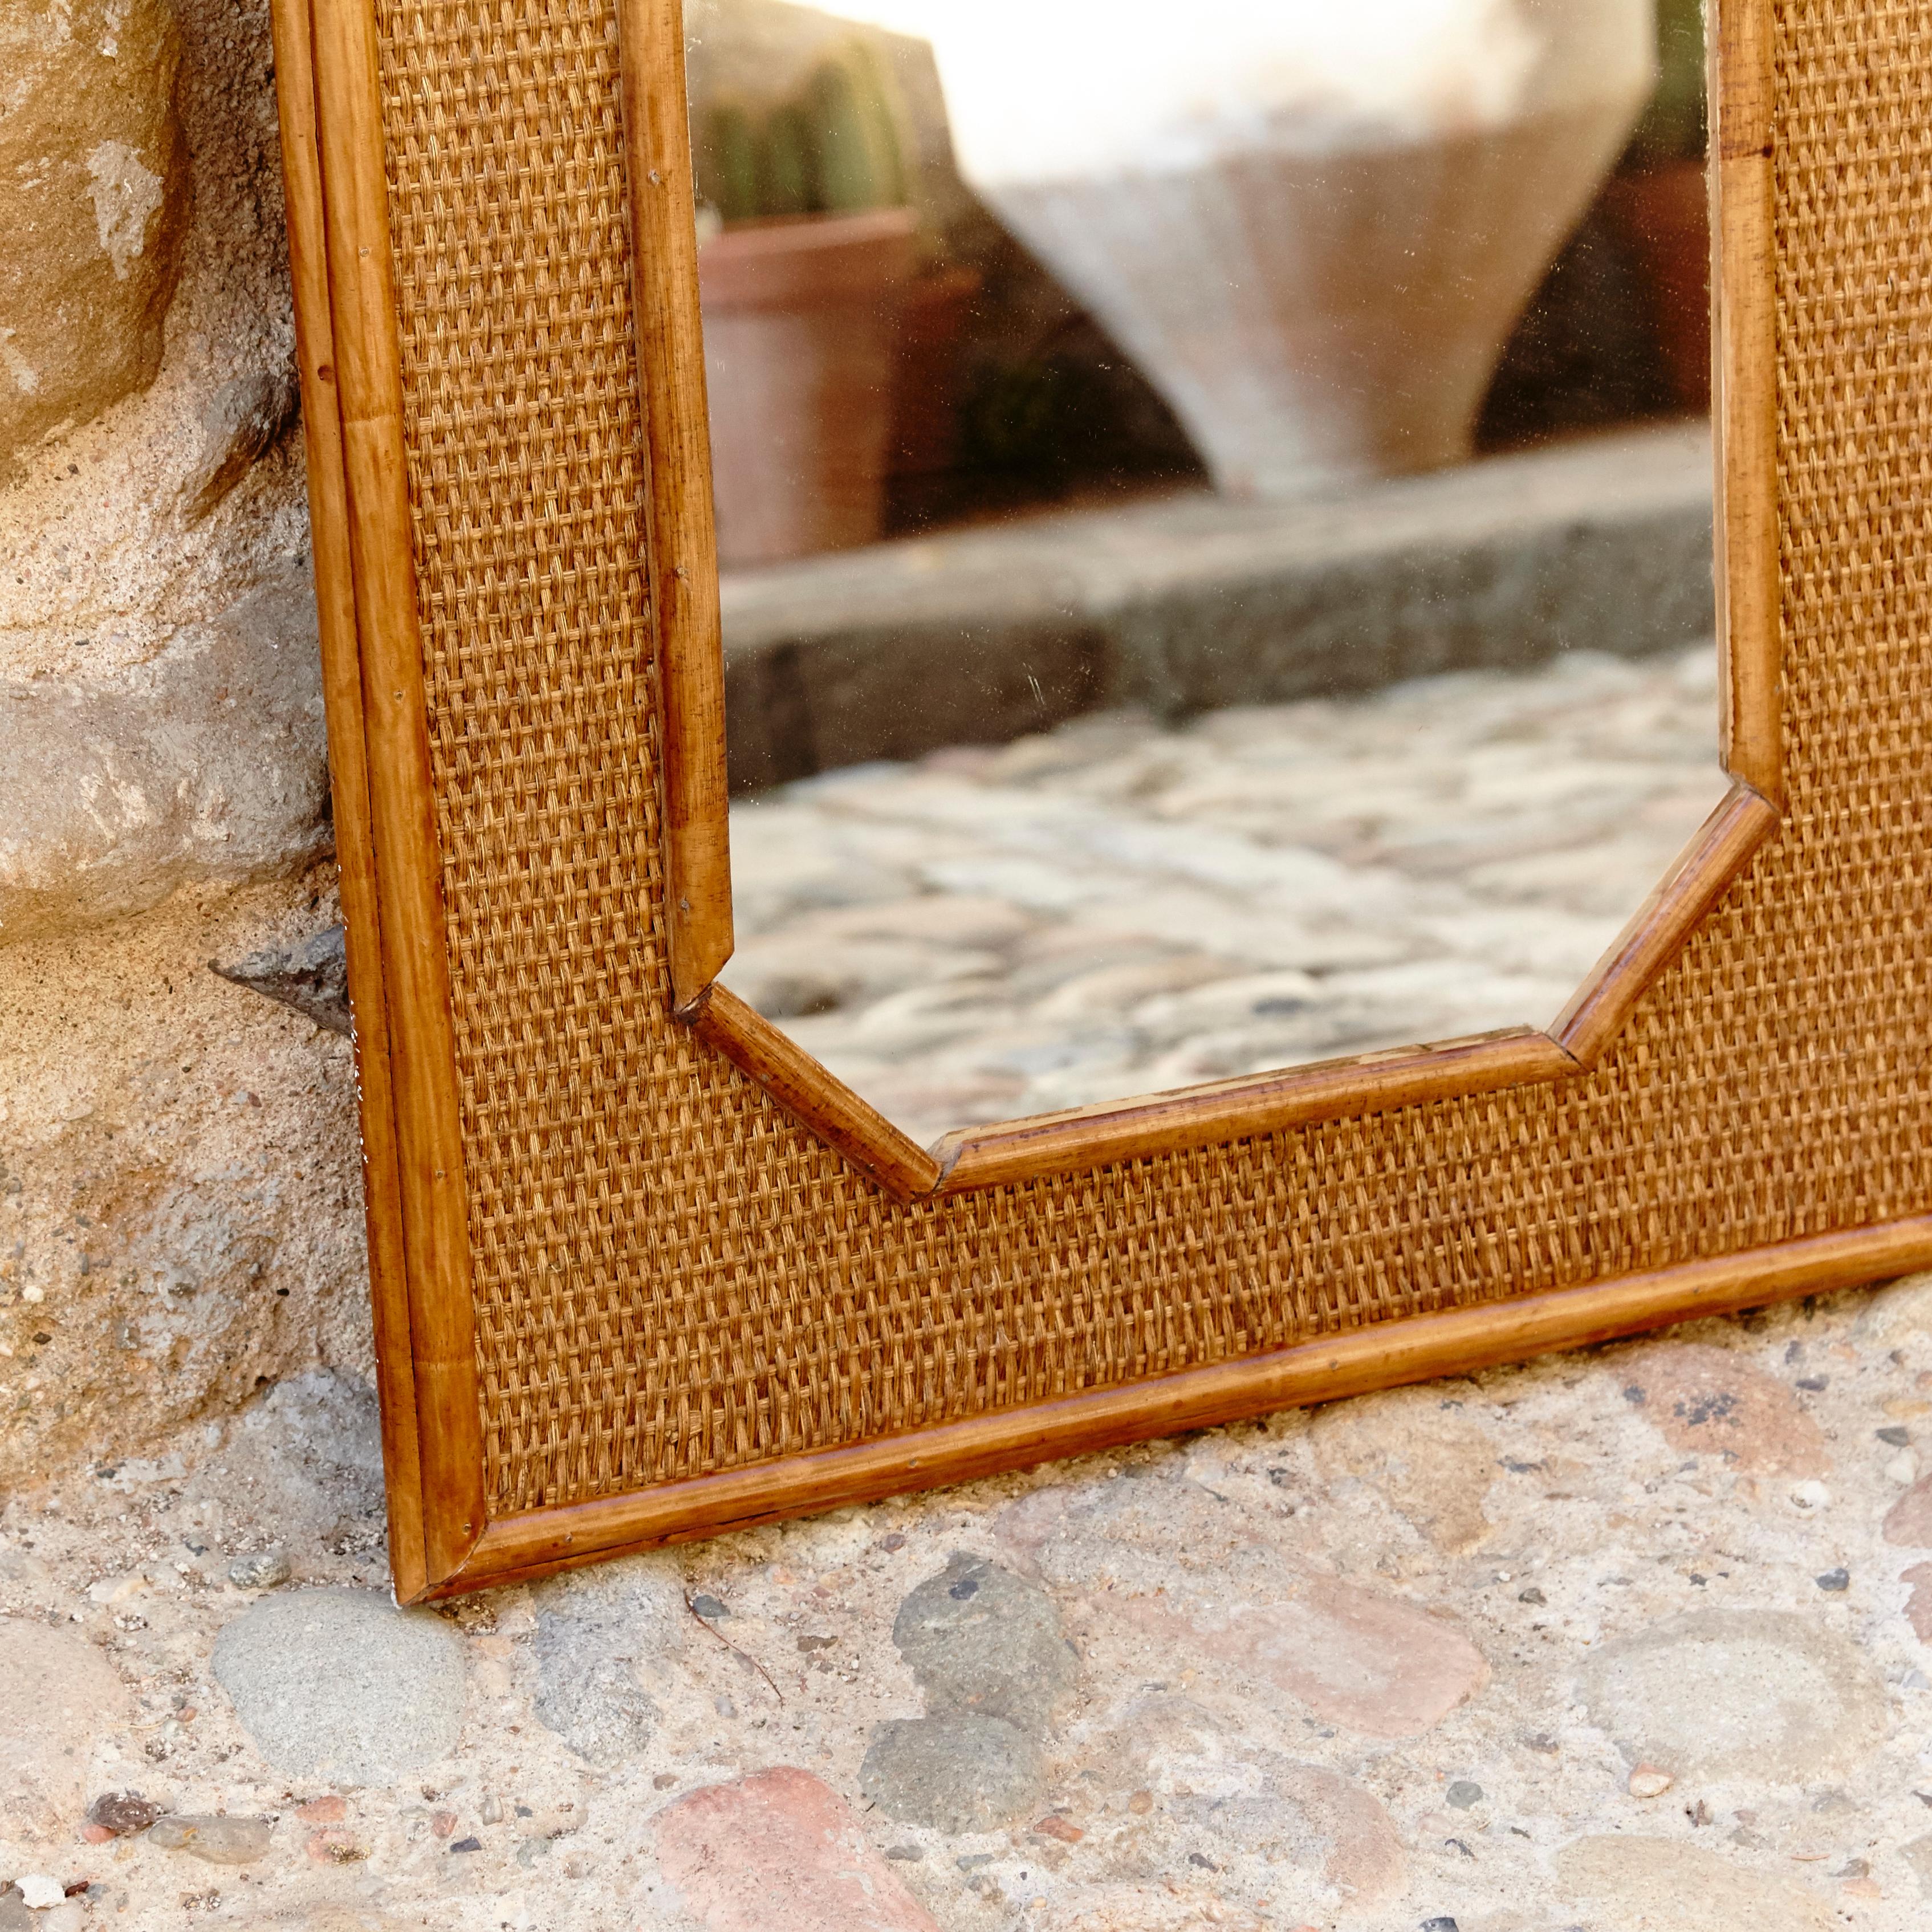 Handcrafted mirror made in French, circa 1960
Bamboo and rattan.

In original condition, with minor wear consistent of age and use, preserving a beautiful patina.